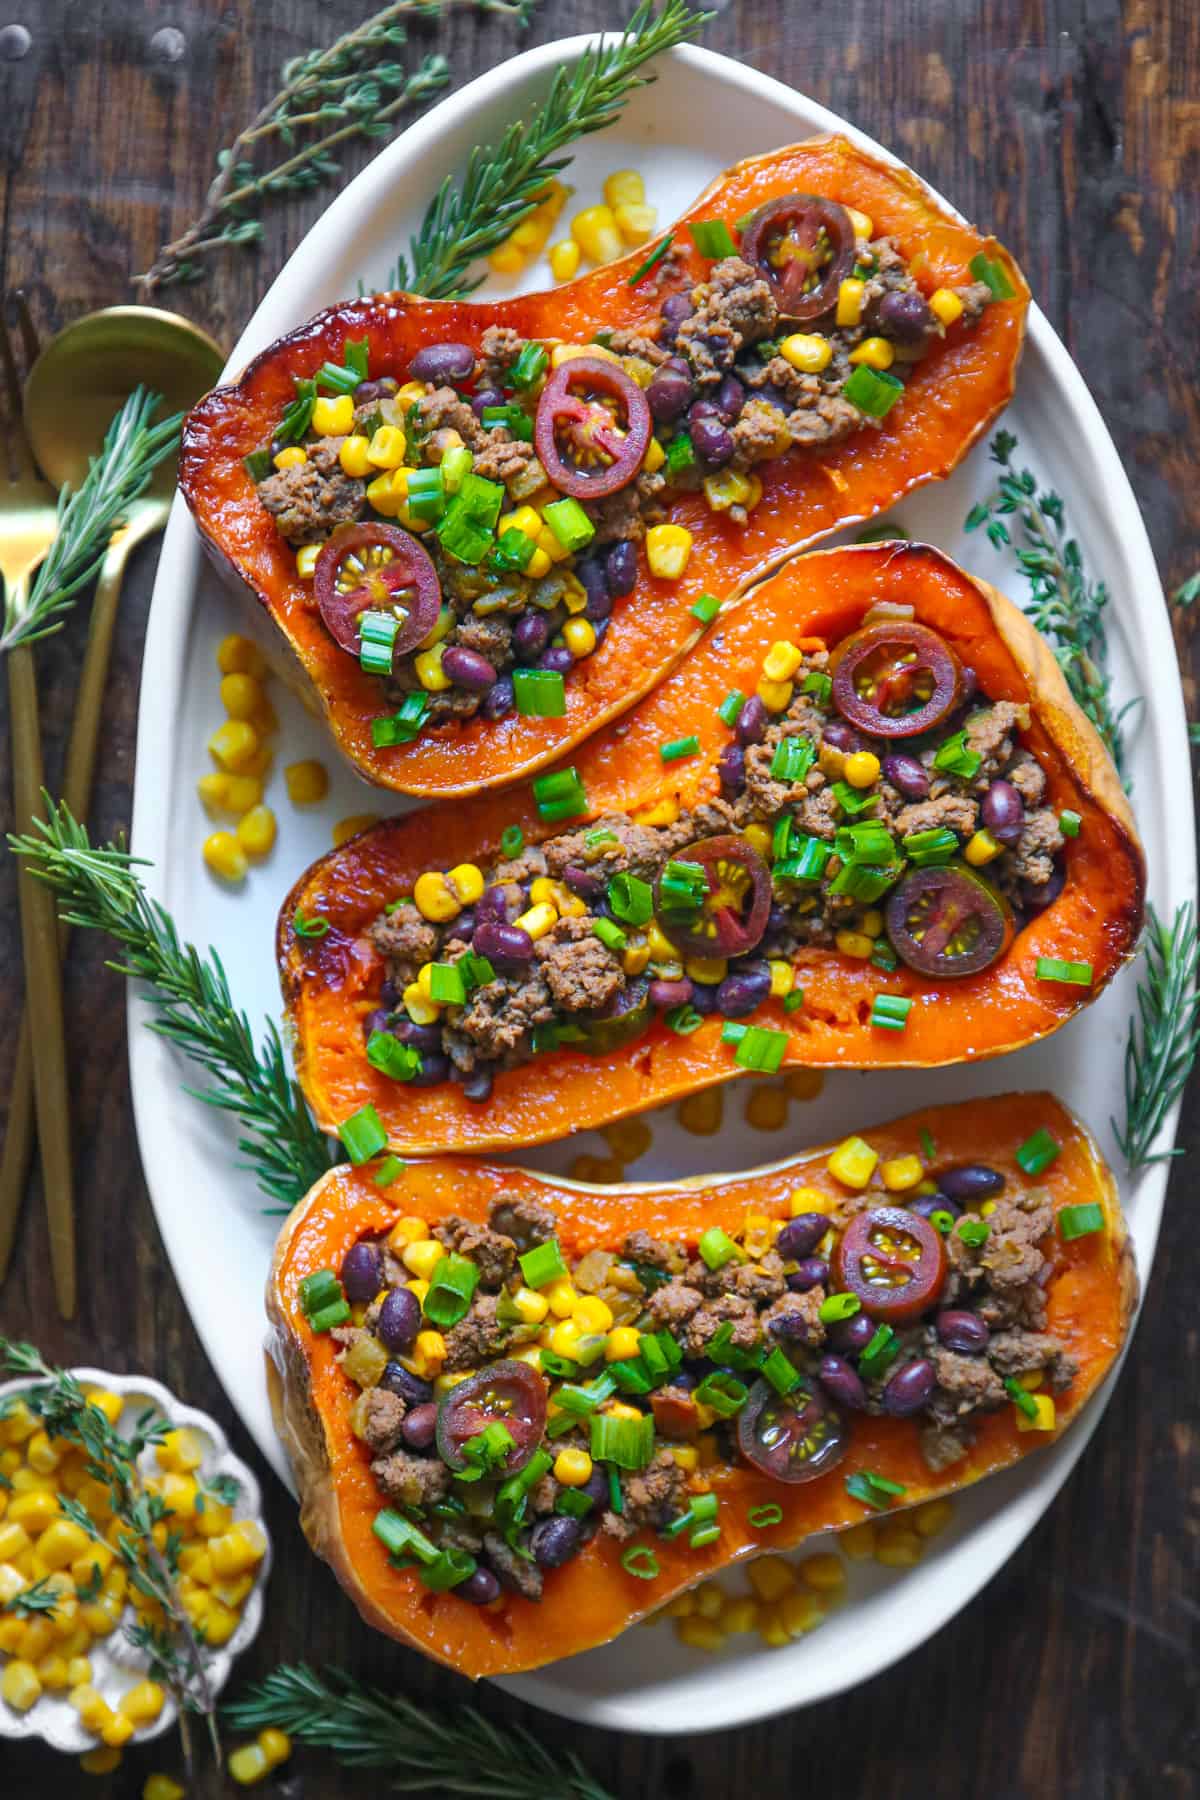 Southwestern Ground Beef Stuffed Butternut Squash with Black Beans, Corn, Tomatoes, Green Onions, mild Green Chiles.